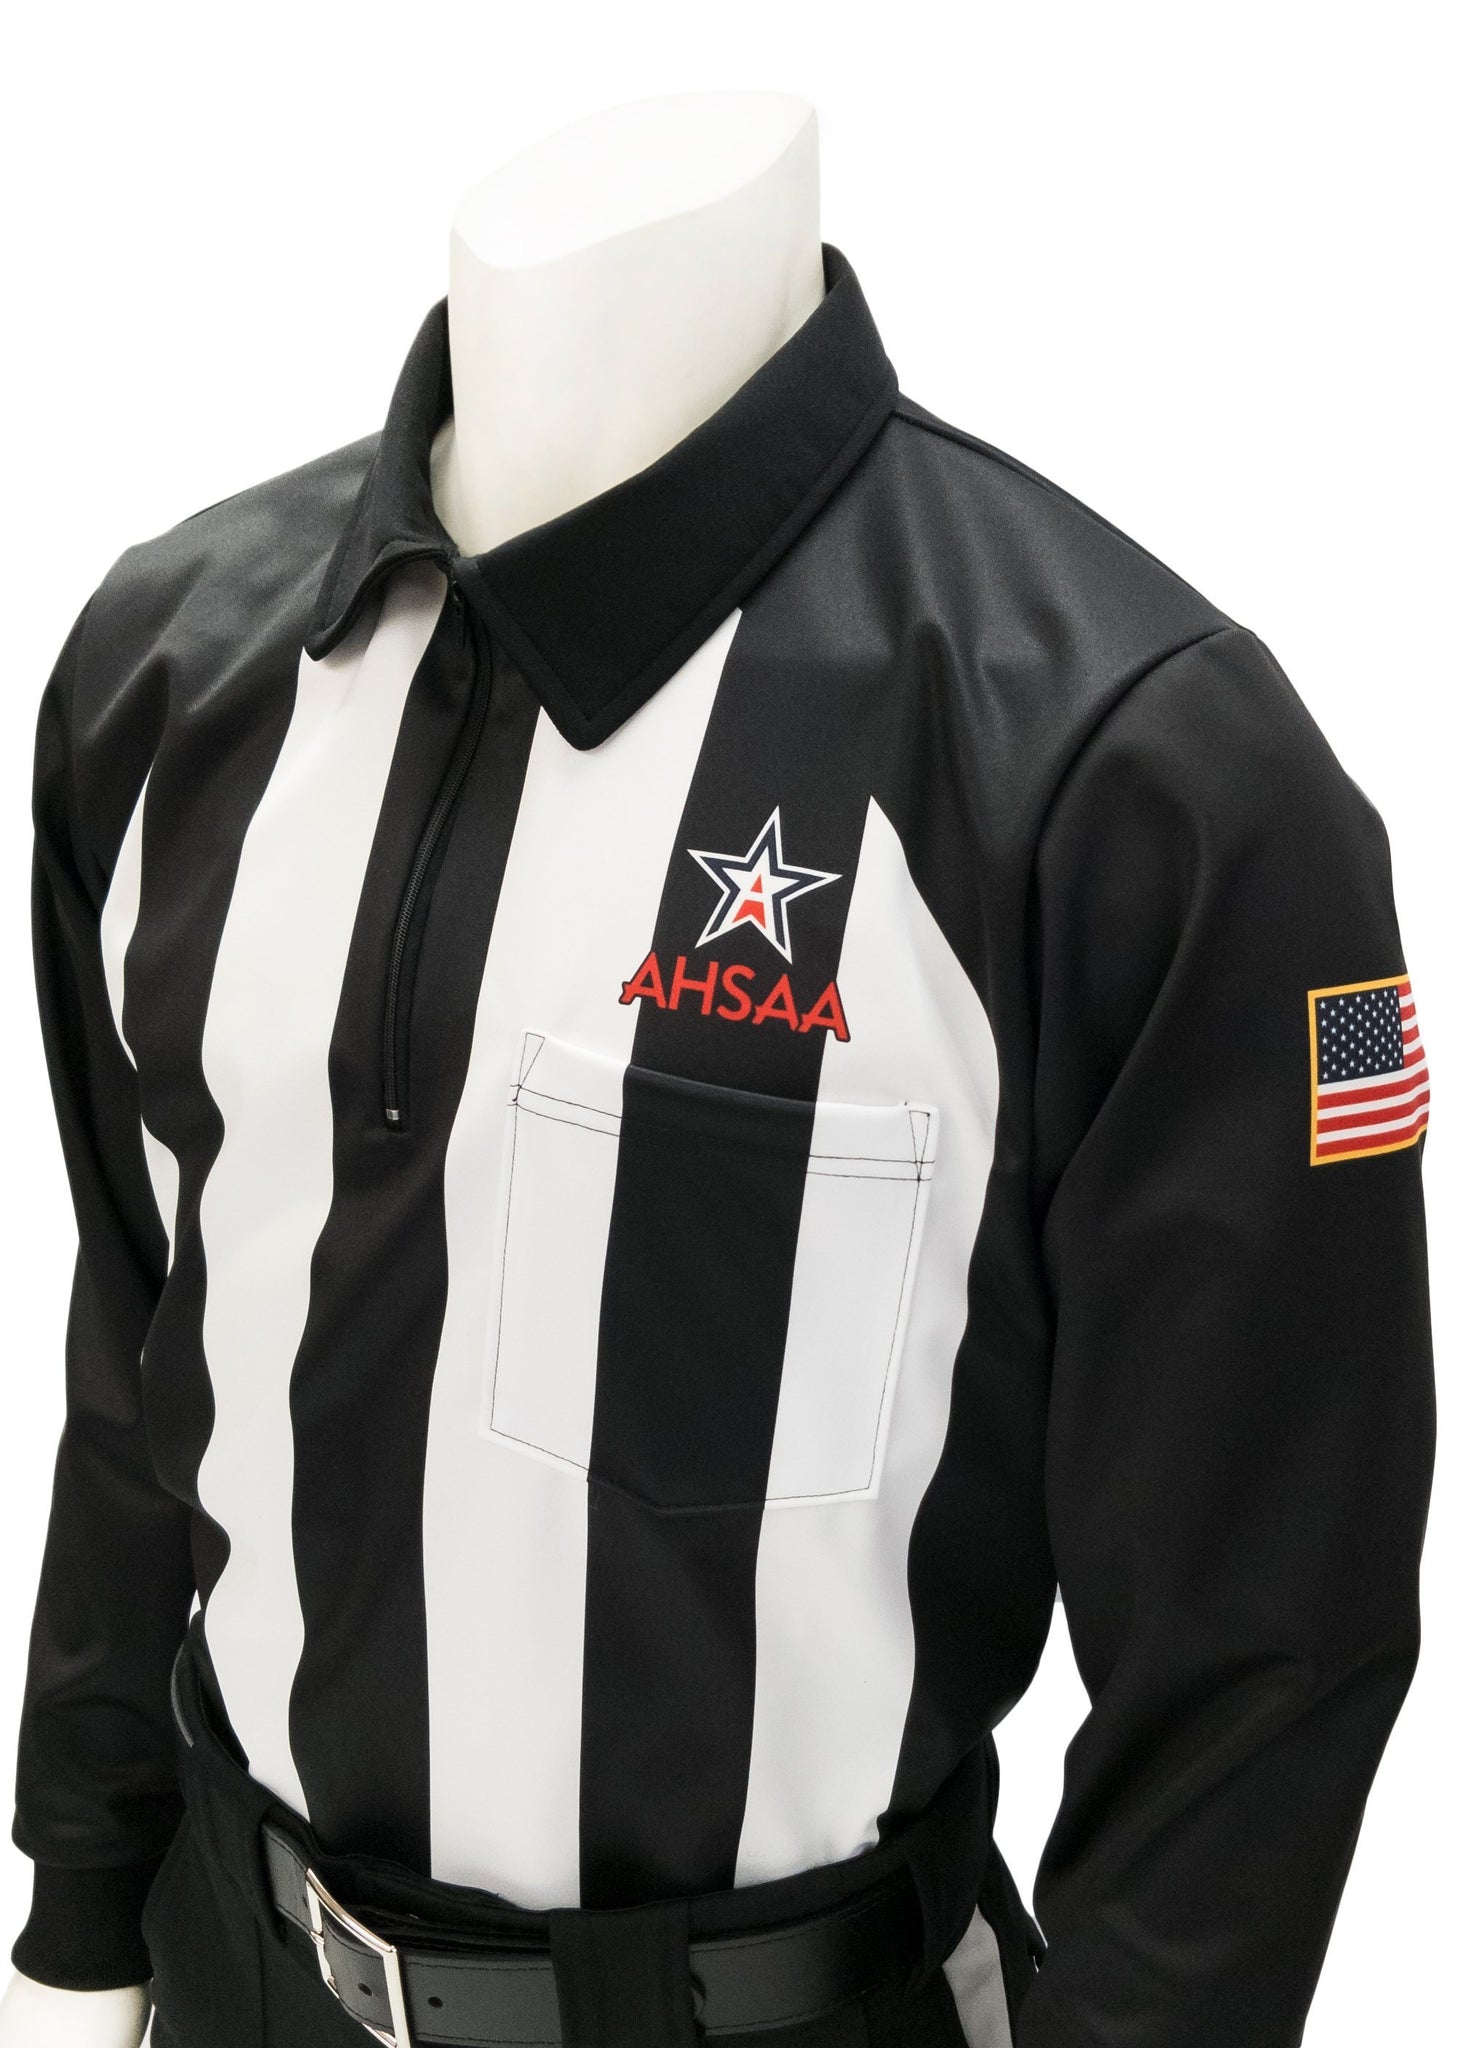 USA730AL - Smitty "Made in USA" - Dye Sub Alabama Foul Weather Water Resistant Football Long Sleeve Shirt